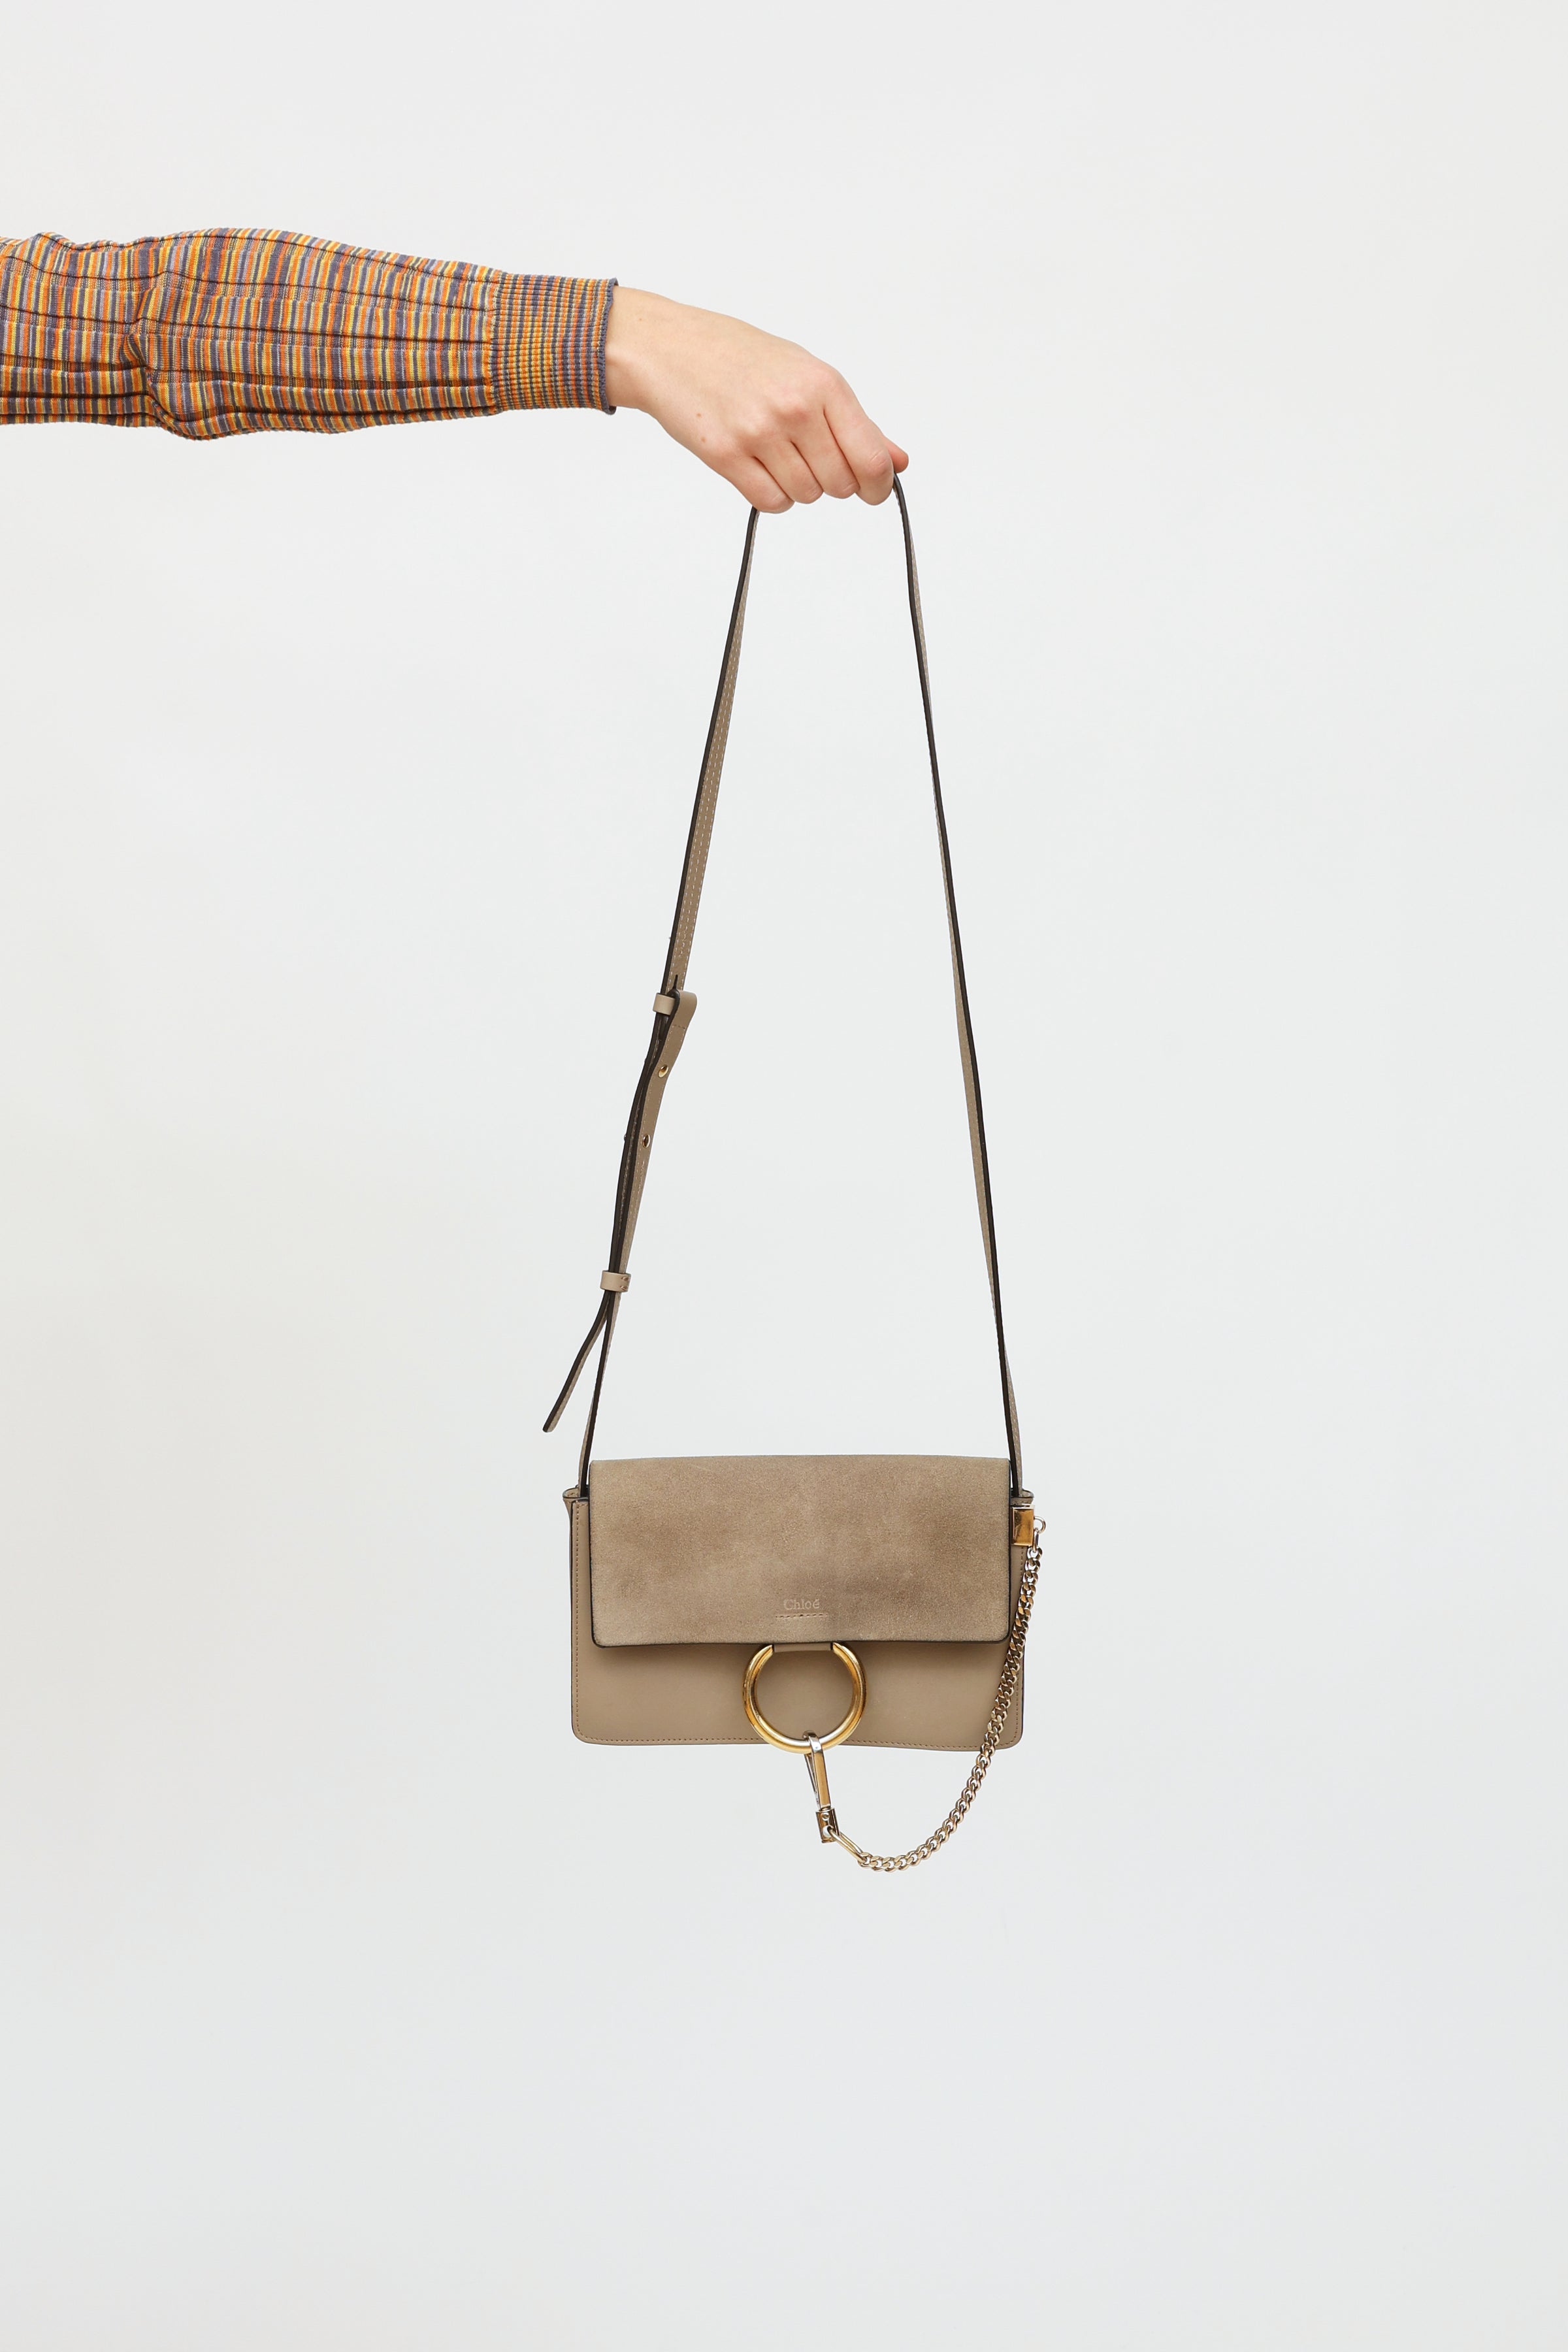 Chloé // Taupe Small Faye Bag – VSP Consignment